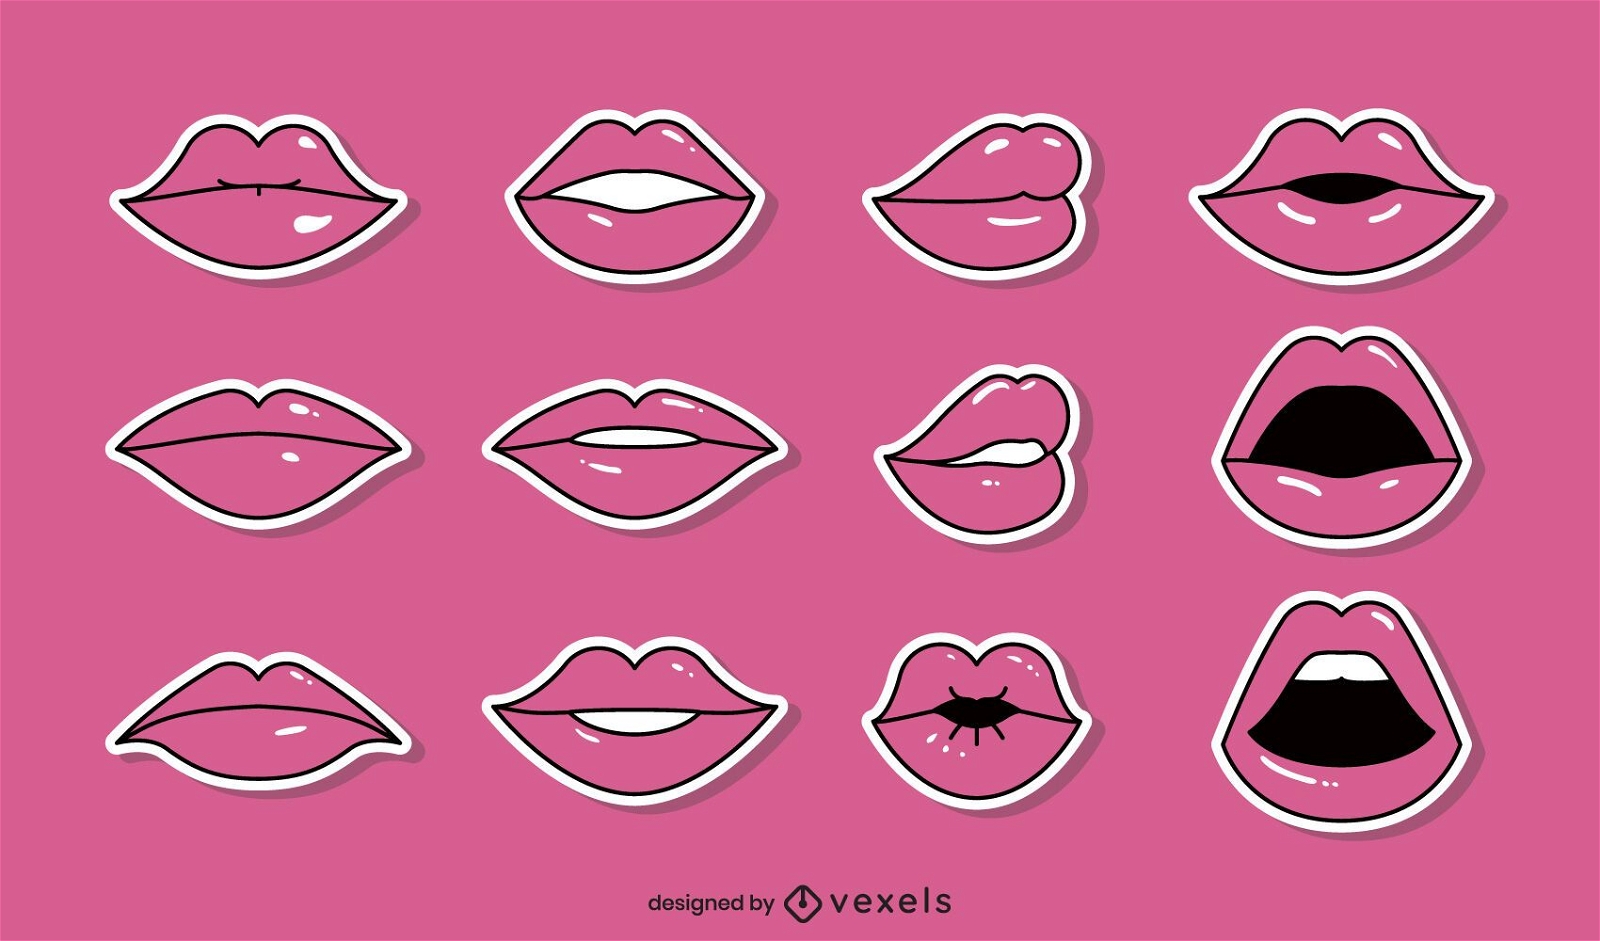 Comic lips vector collection